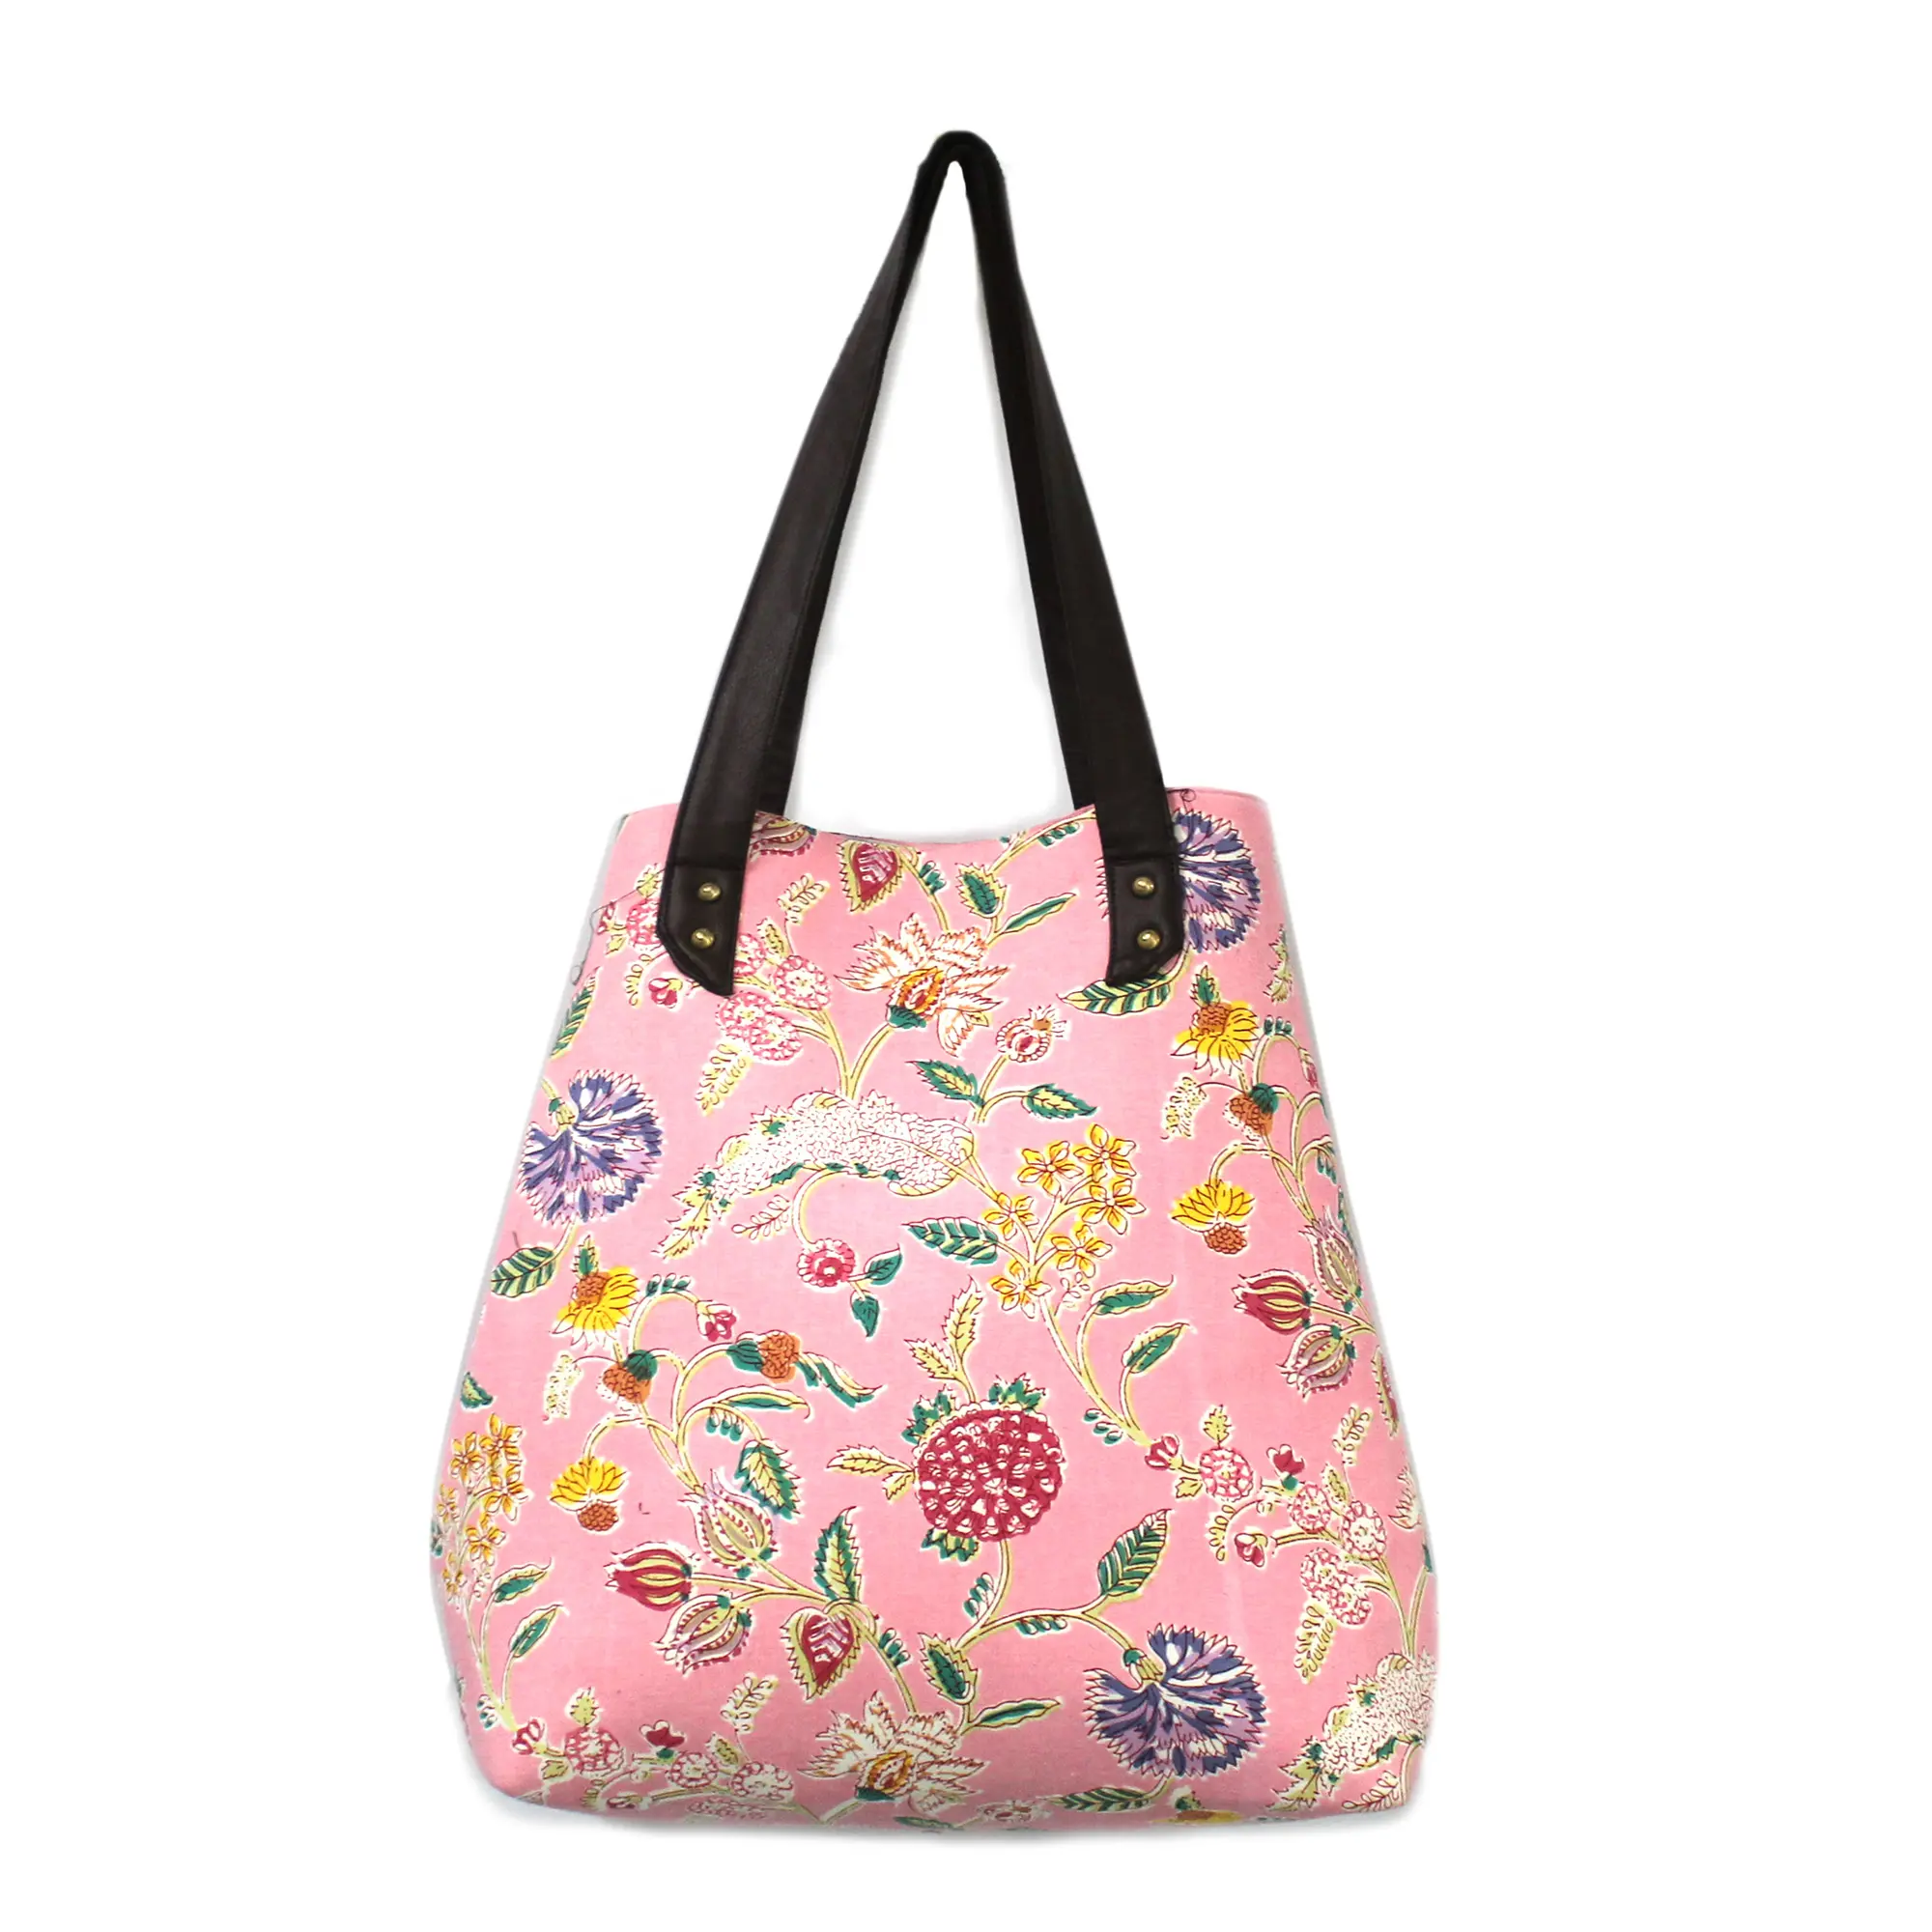 Indian Handmade New Baby Pink Shoulder Bag Floral Printed Purse Tote Bags Cotton Woven Bags